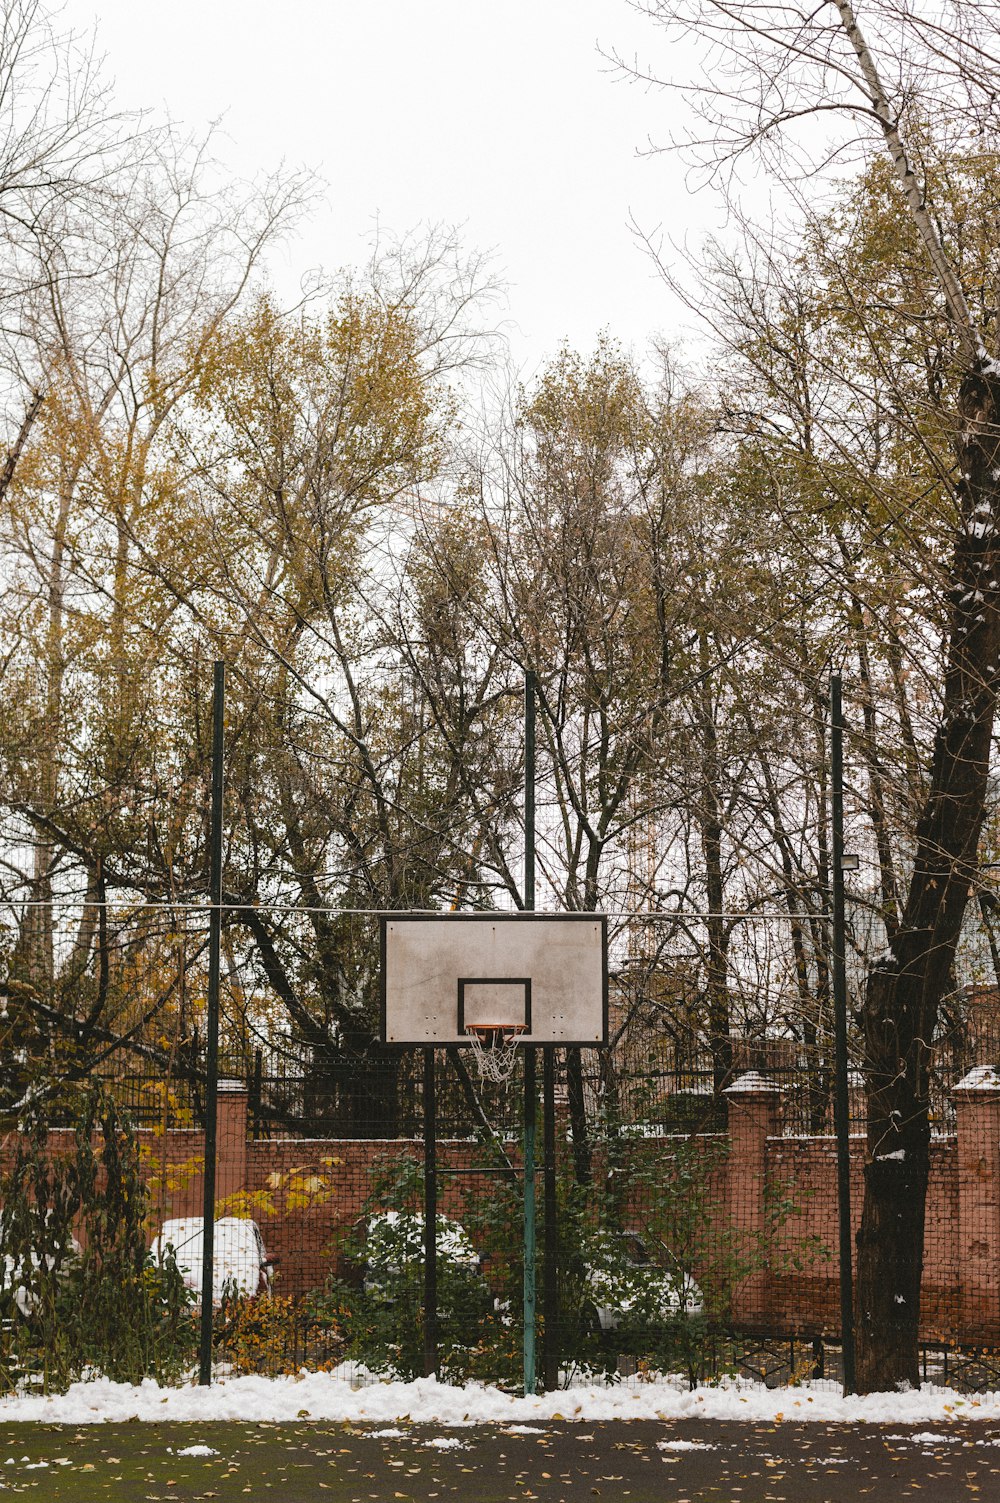 a basketball hoop in the middle of a snowy park